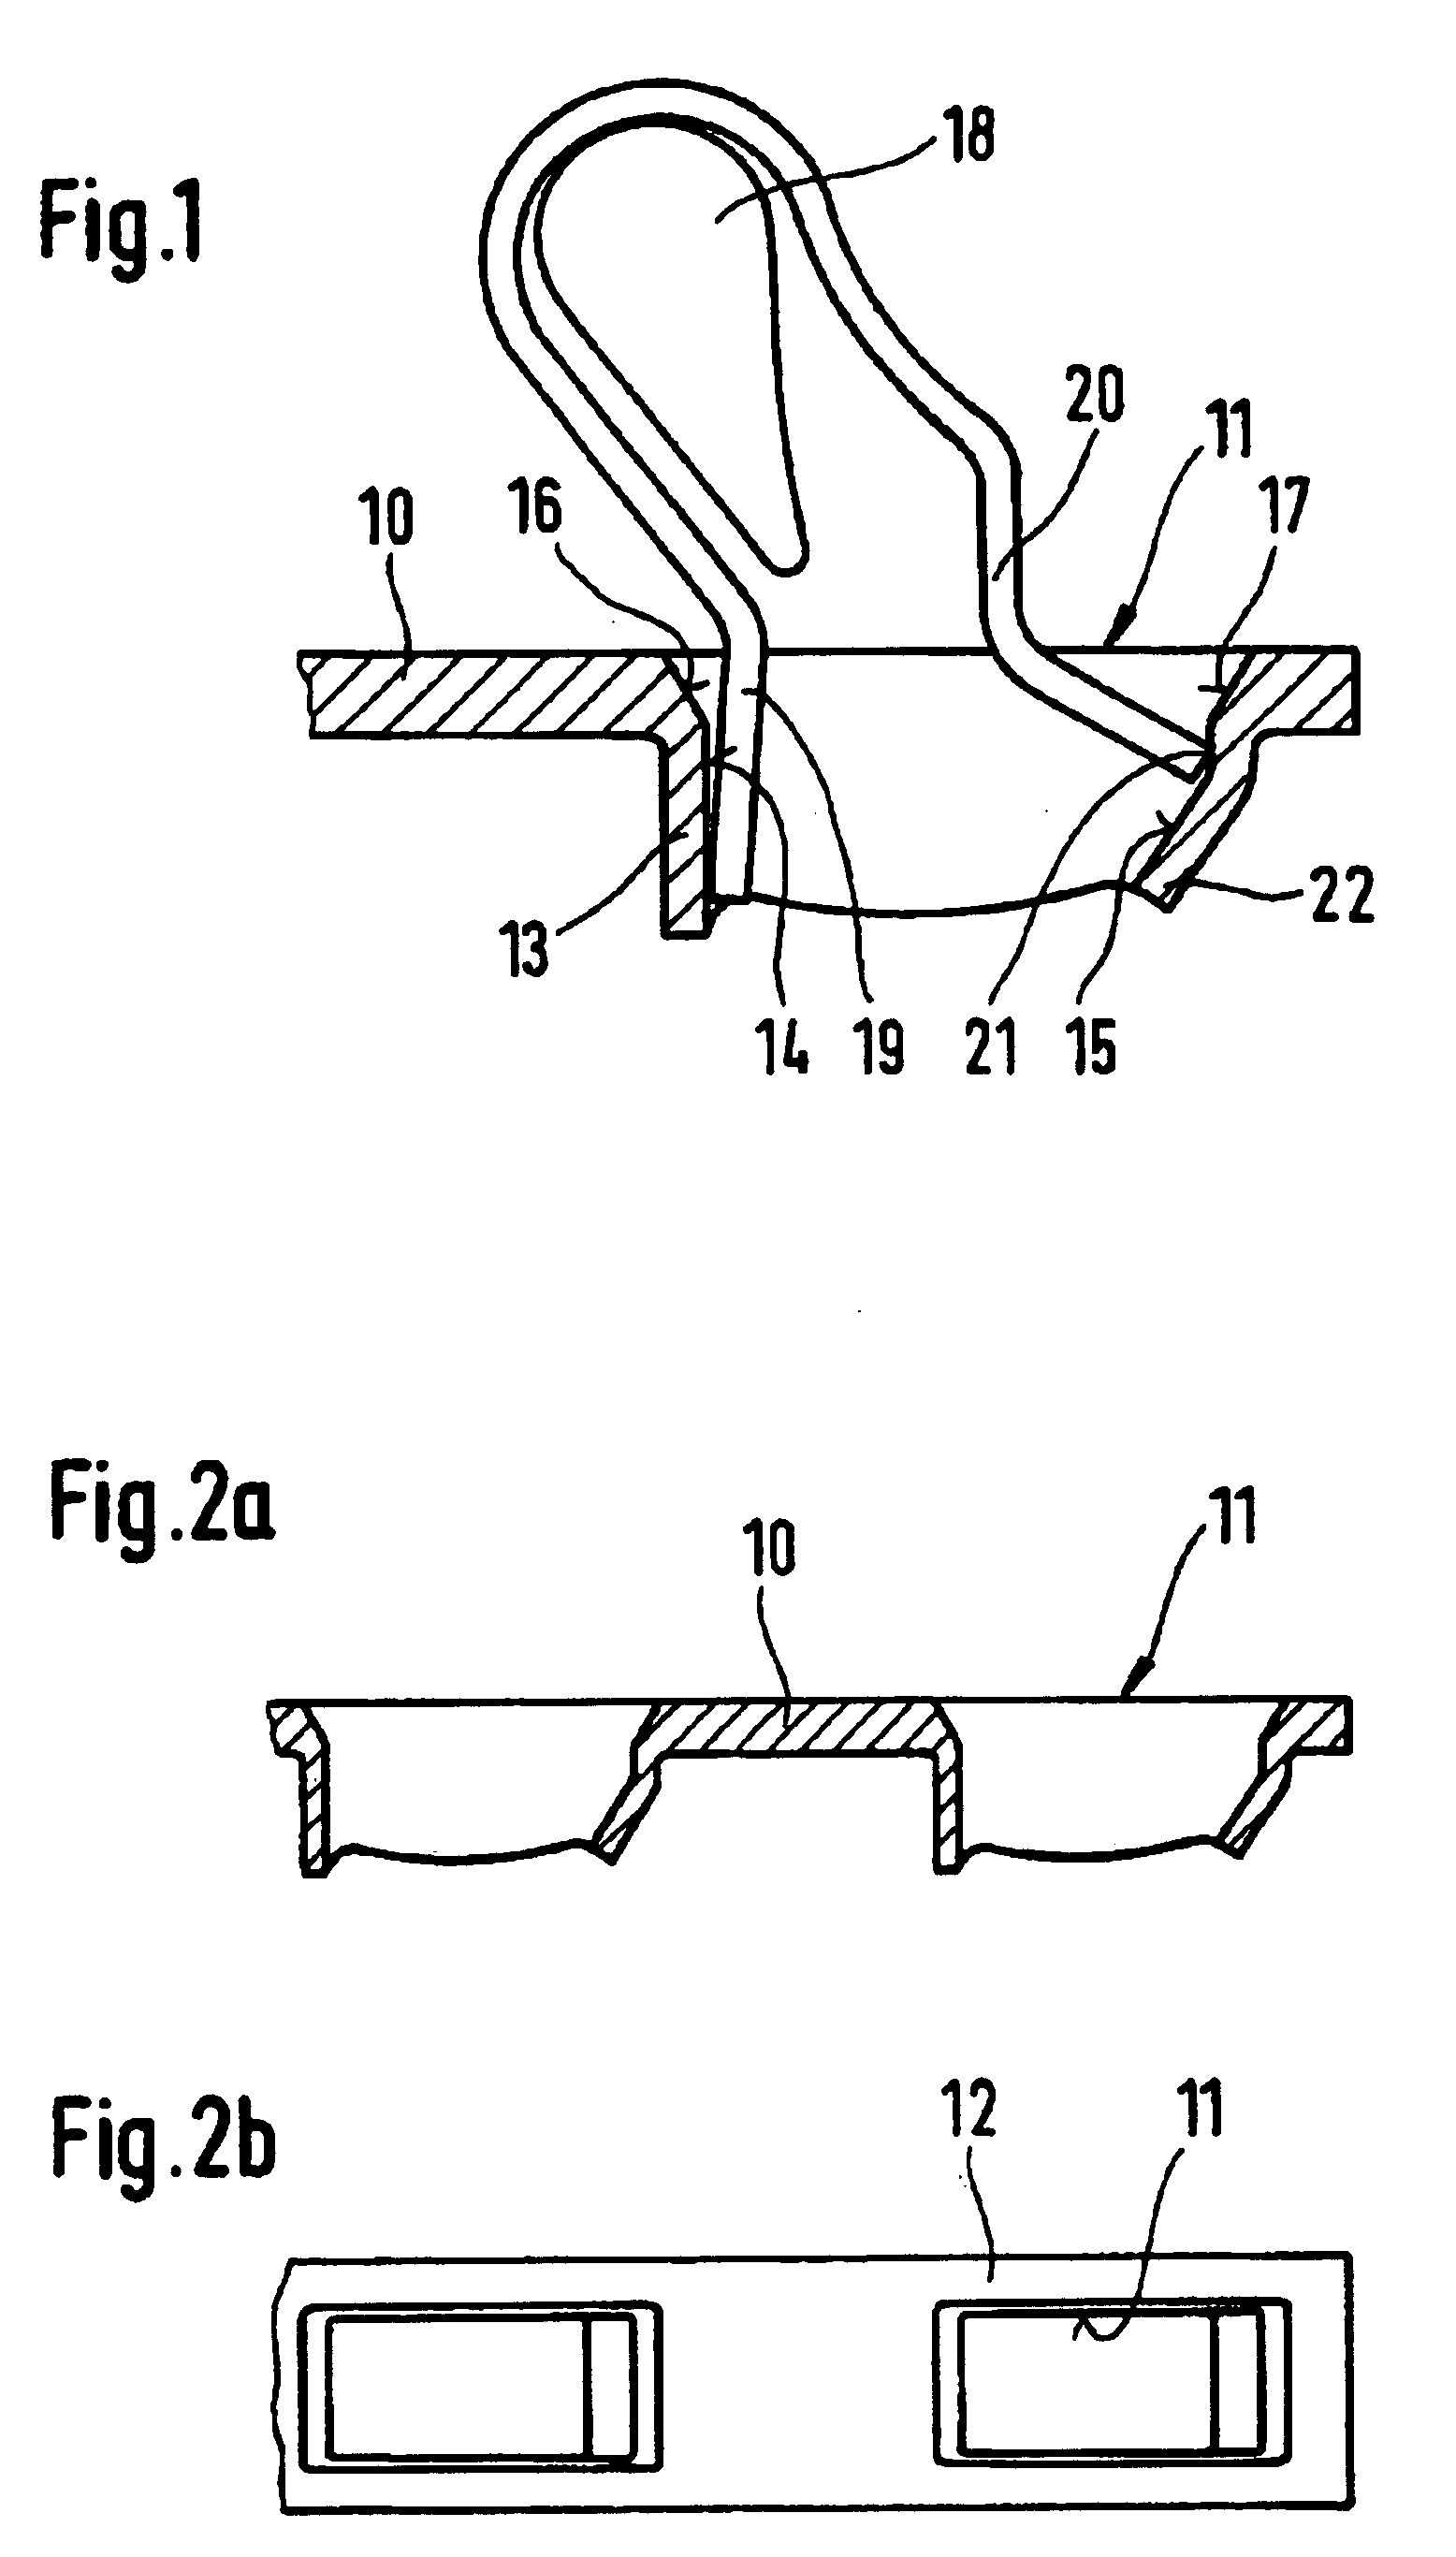 Spring-force clamp connector for an electrical conductor